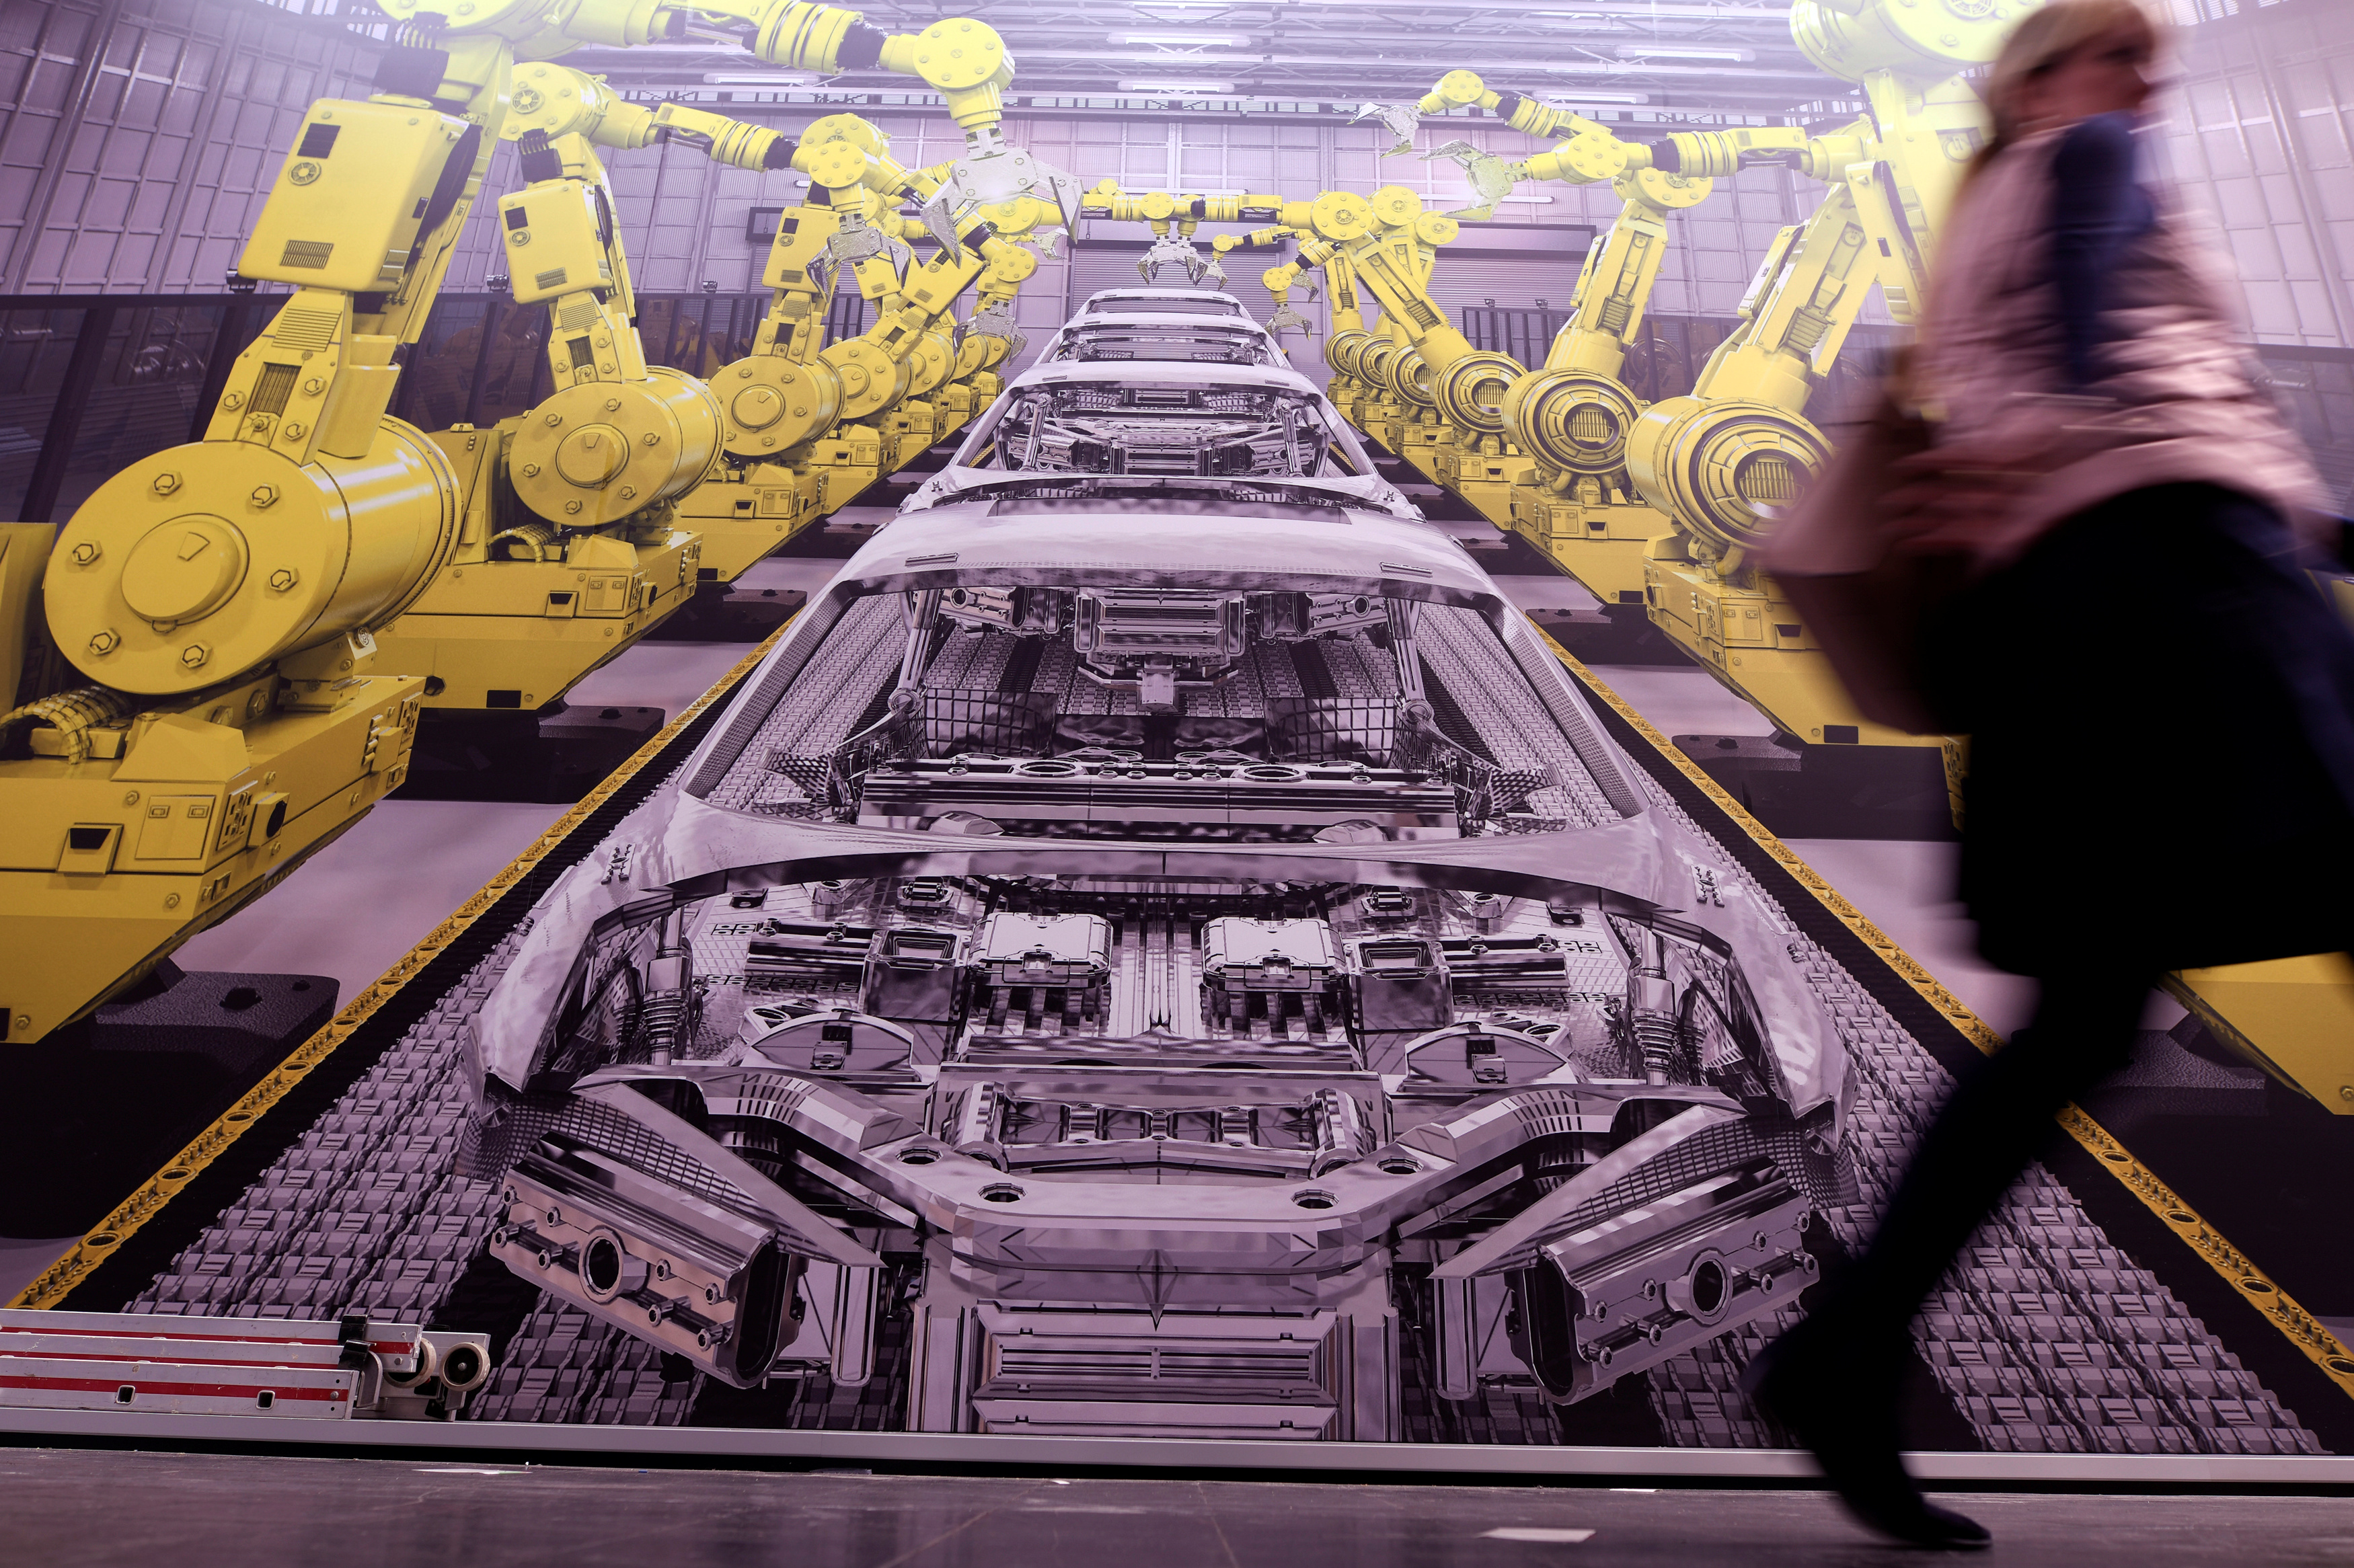 A woman passes a poster showing a production line with robots at the Hanover trade fair, in Hanover